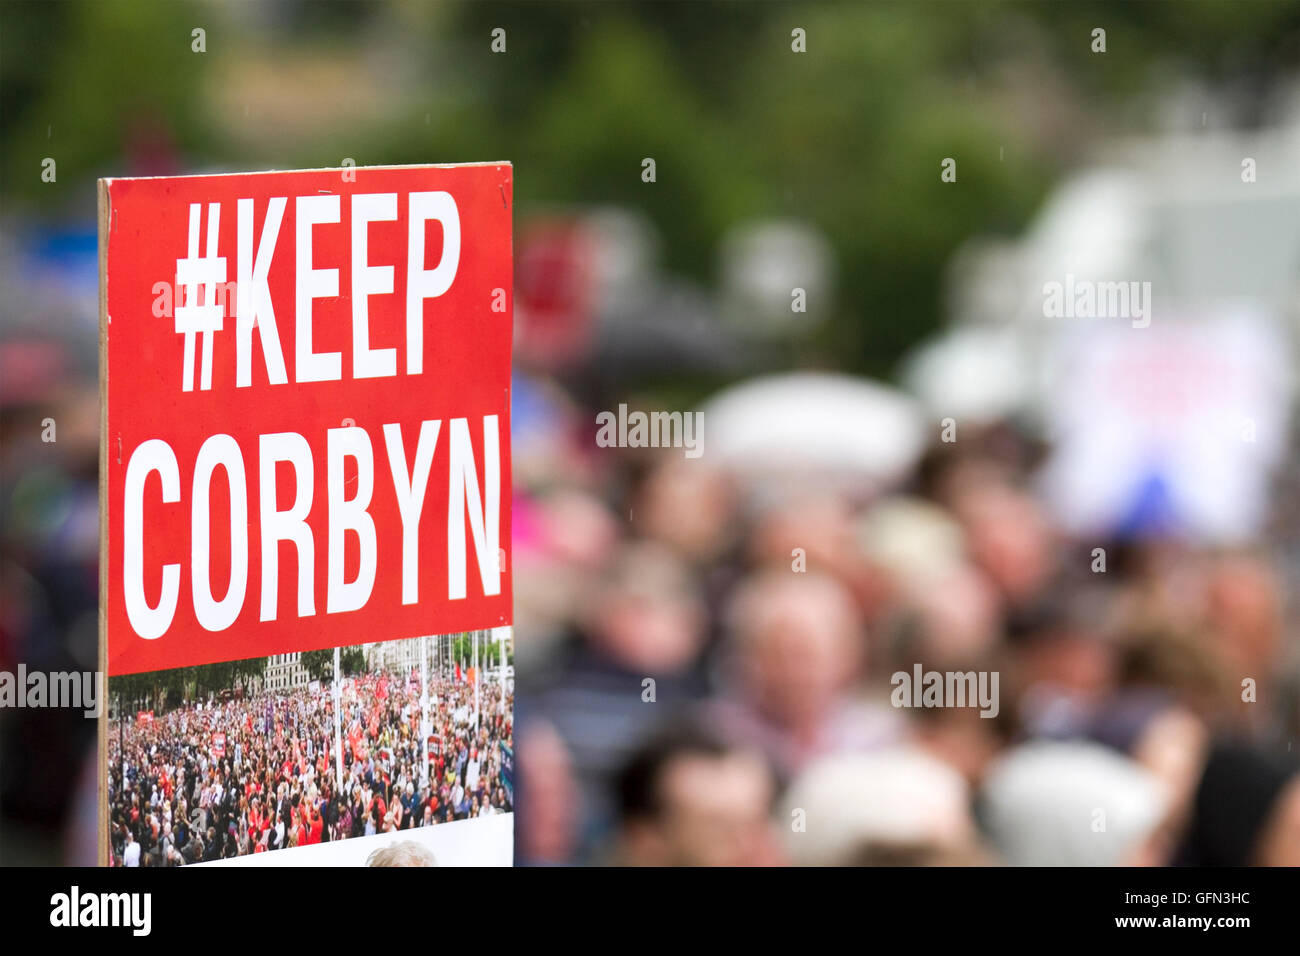 Liverpool, Merseyside, UK. 1st August 2016. Jeremy Corbyn addresses rally.  A tired looking Jeremy Corbyn attends a party rally in the Labour heartland of Liverpool, Merseyside.  Only a thousand or so Corbyn supporters sprouting torn cardboard slogans showed up on the steps outside St' Georges Hall.  Behind the miltant banners and aroma of marijuana was a broken down political machine.  If these hardcore voters were expecting a statesman to appear, they were sadly disappointed. Credit:  Cernan Elias/Alamy Live News Stock Photo